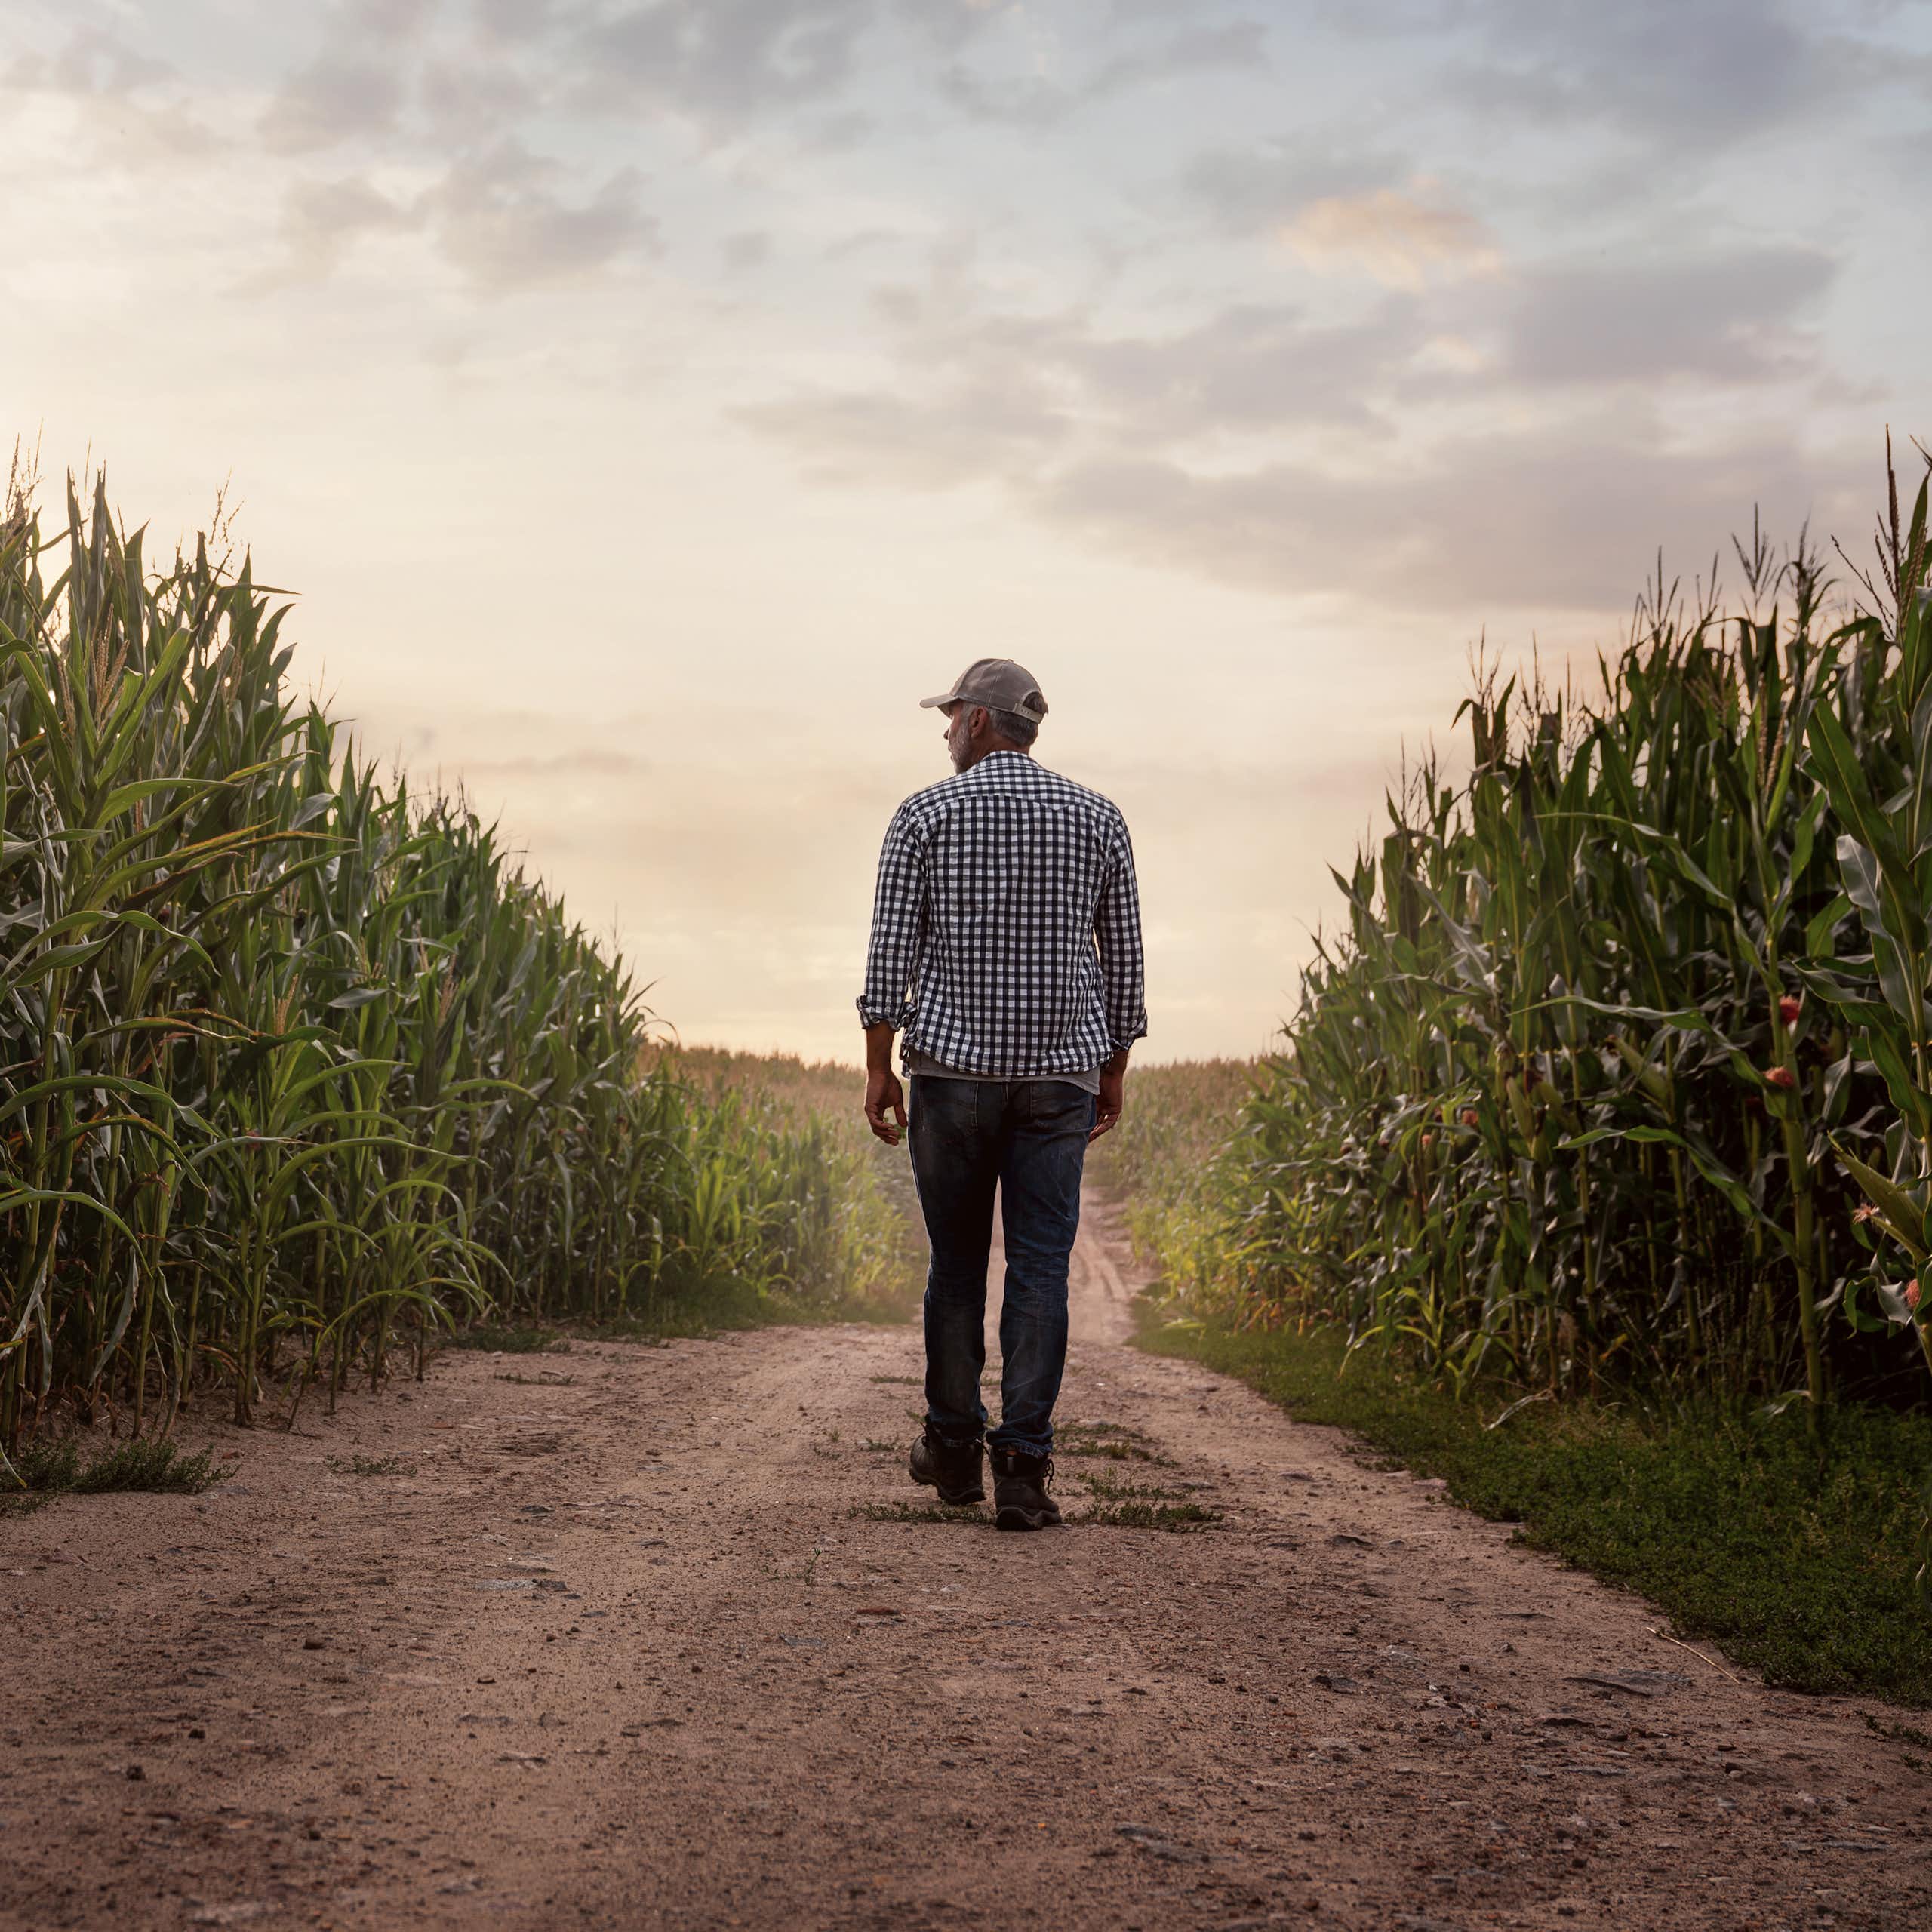 A man in a plaid shirt and jeans walking down a dirt path between fields of corn